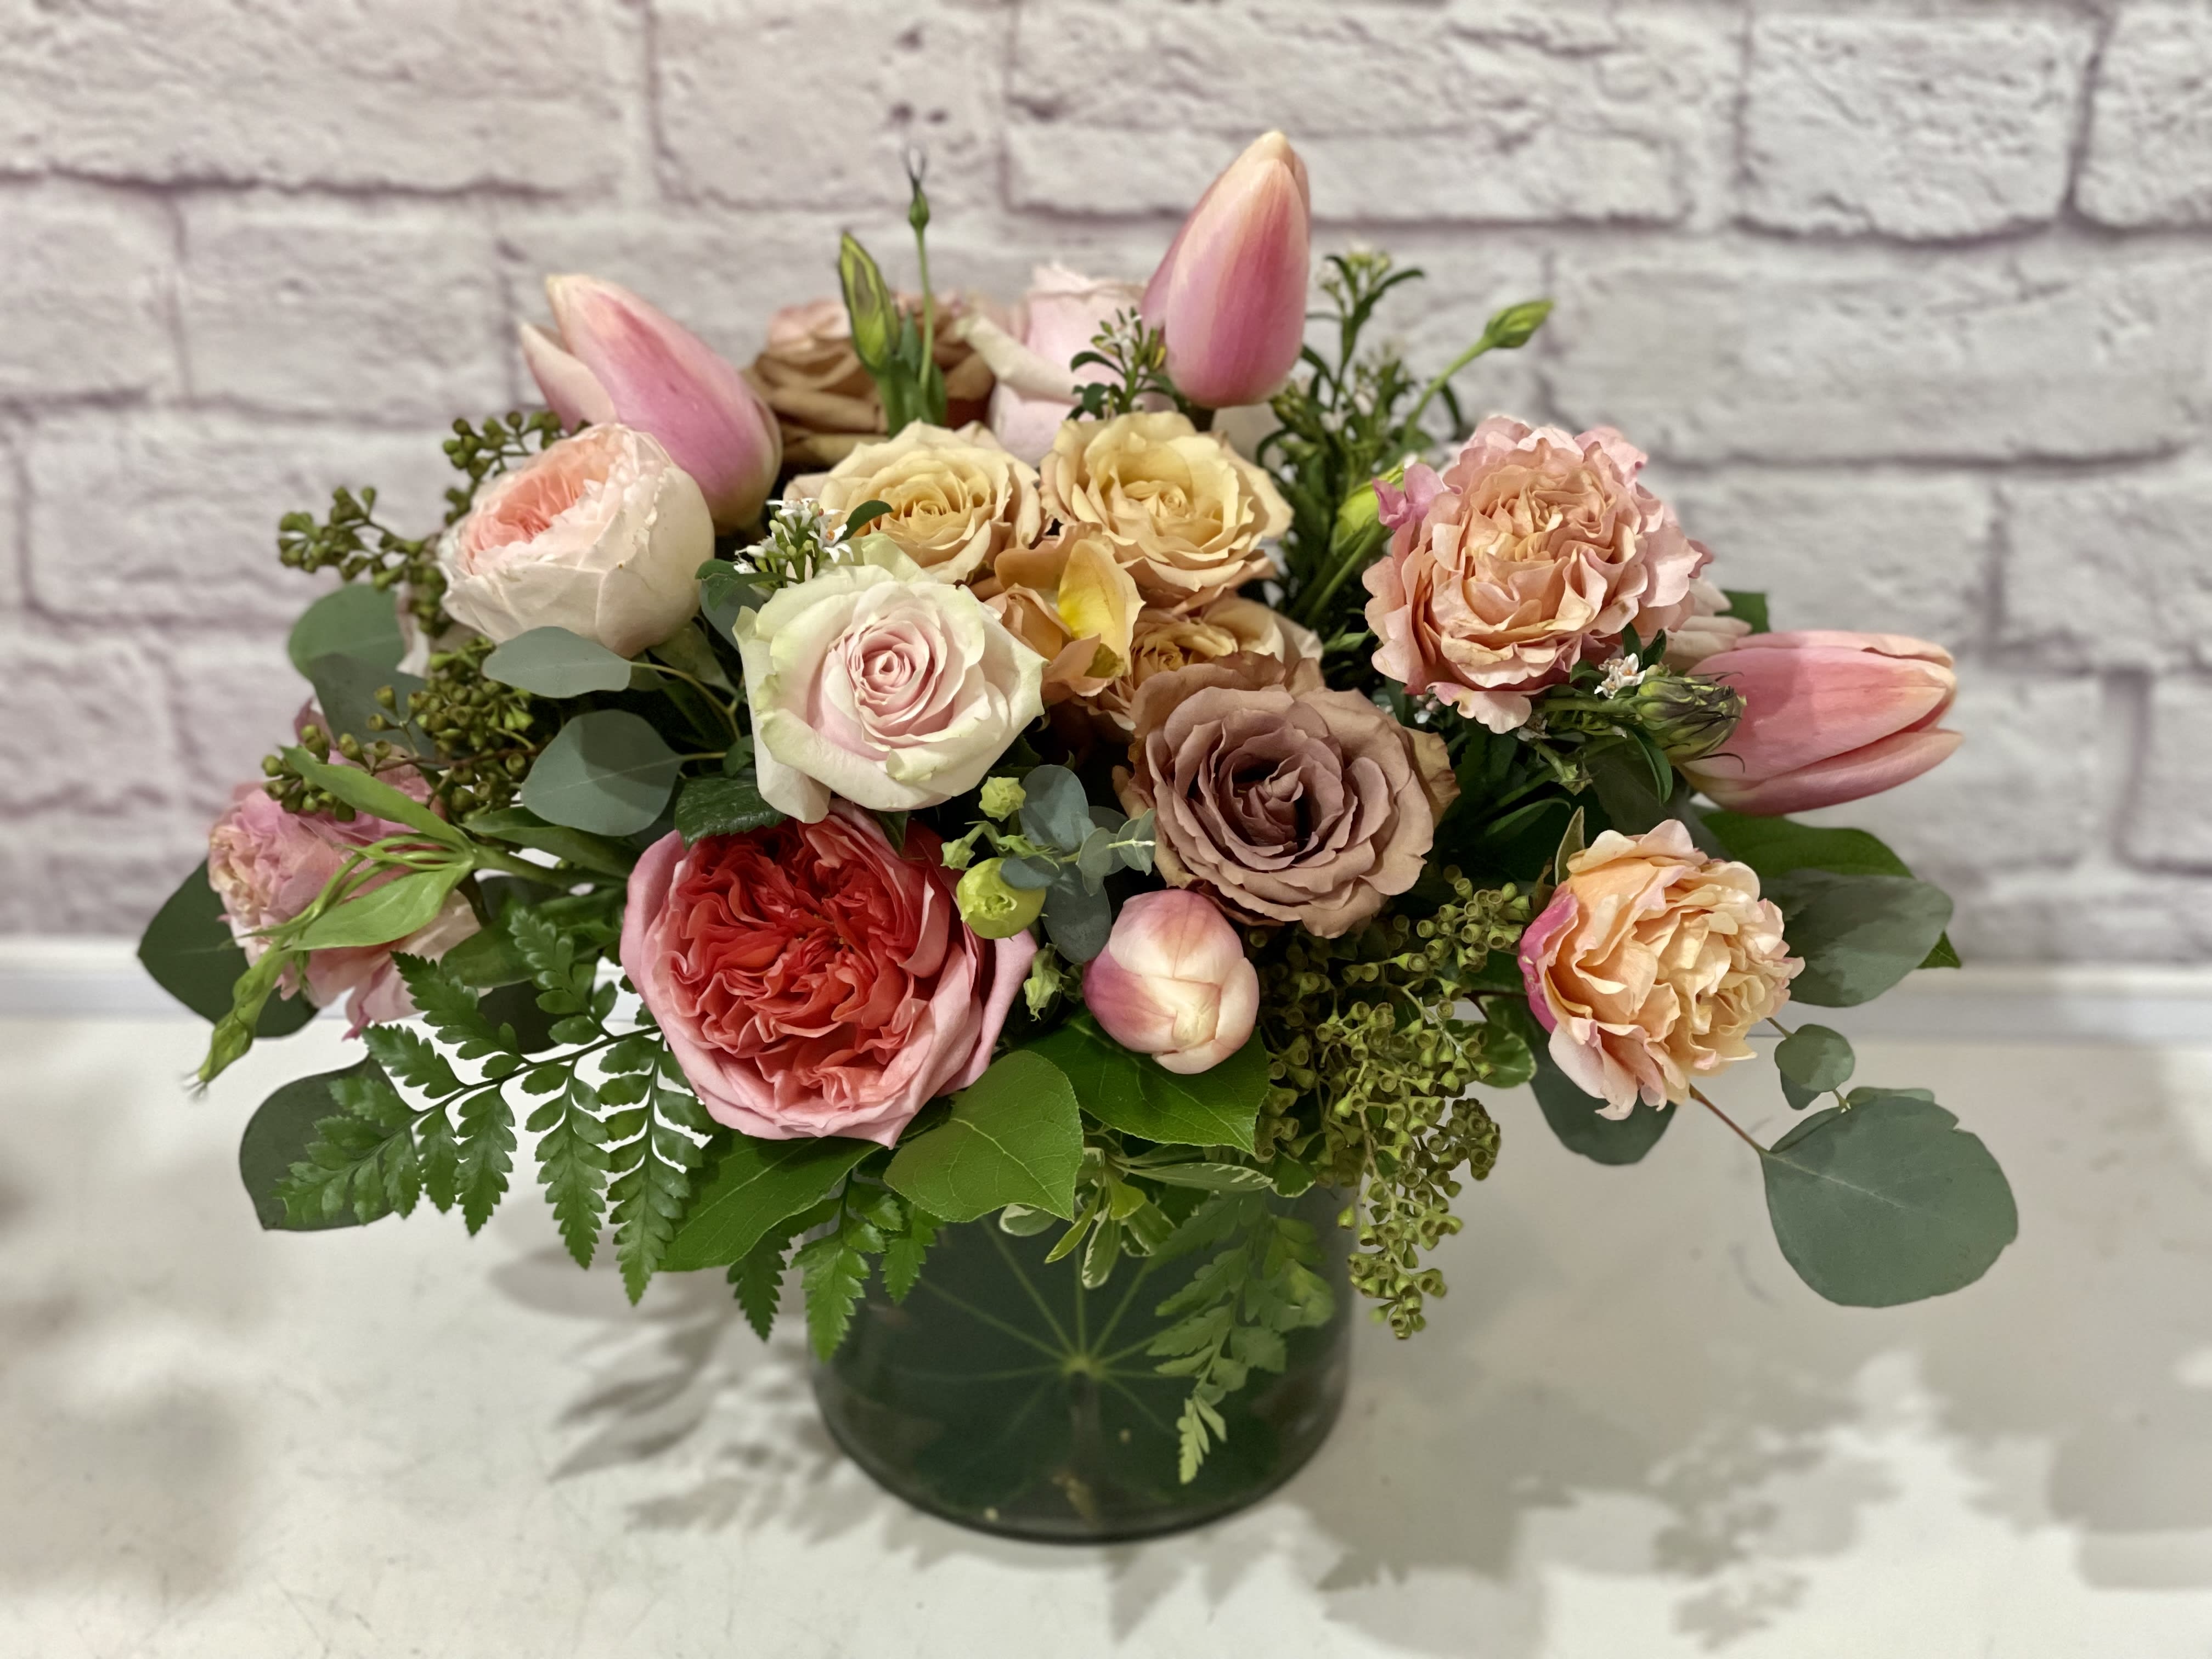 Springtime Grace - A lovely balance of blooms and high end foliage arranged in a loose, wind swept style and delivered inside a quality ceramic vase. Includes specialty “amnesia” roses, black callas, panda anemones, chocolate cosmos, chocolate Queen Anne’s lace, and blue thistle. A true winter beauty. 